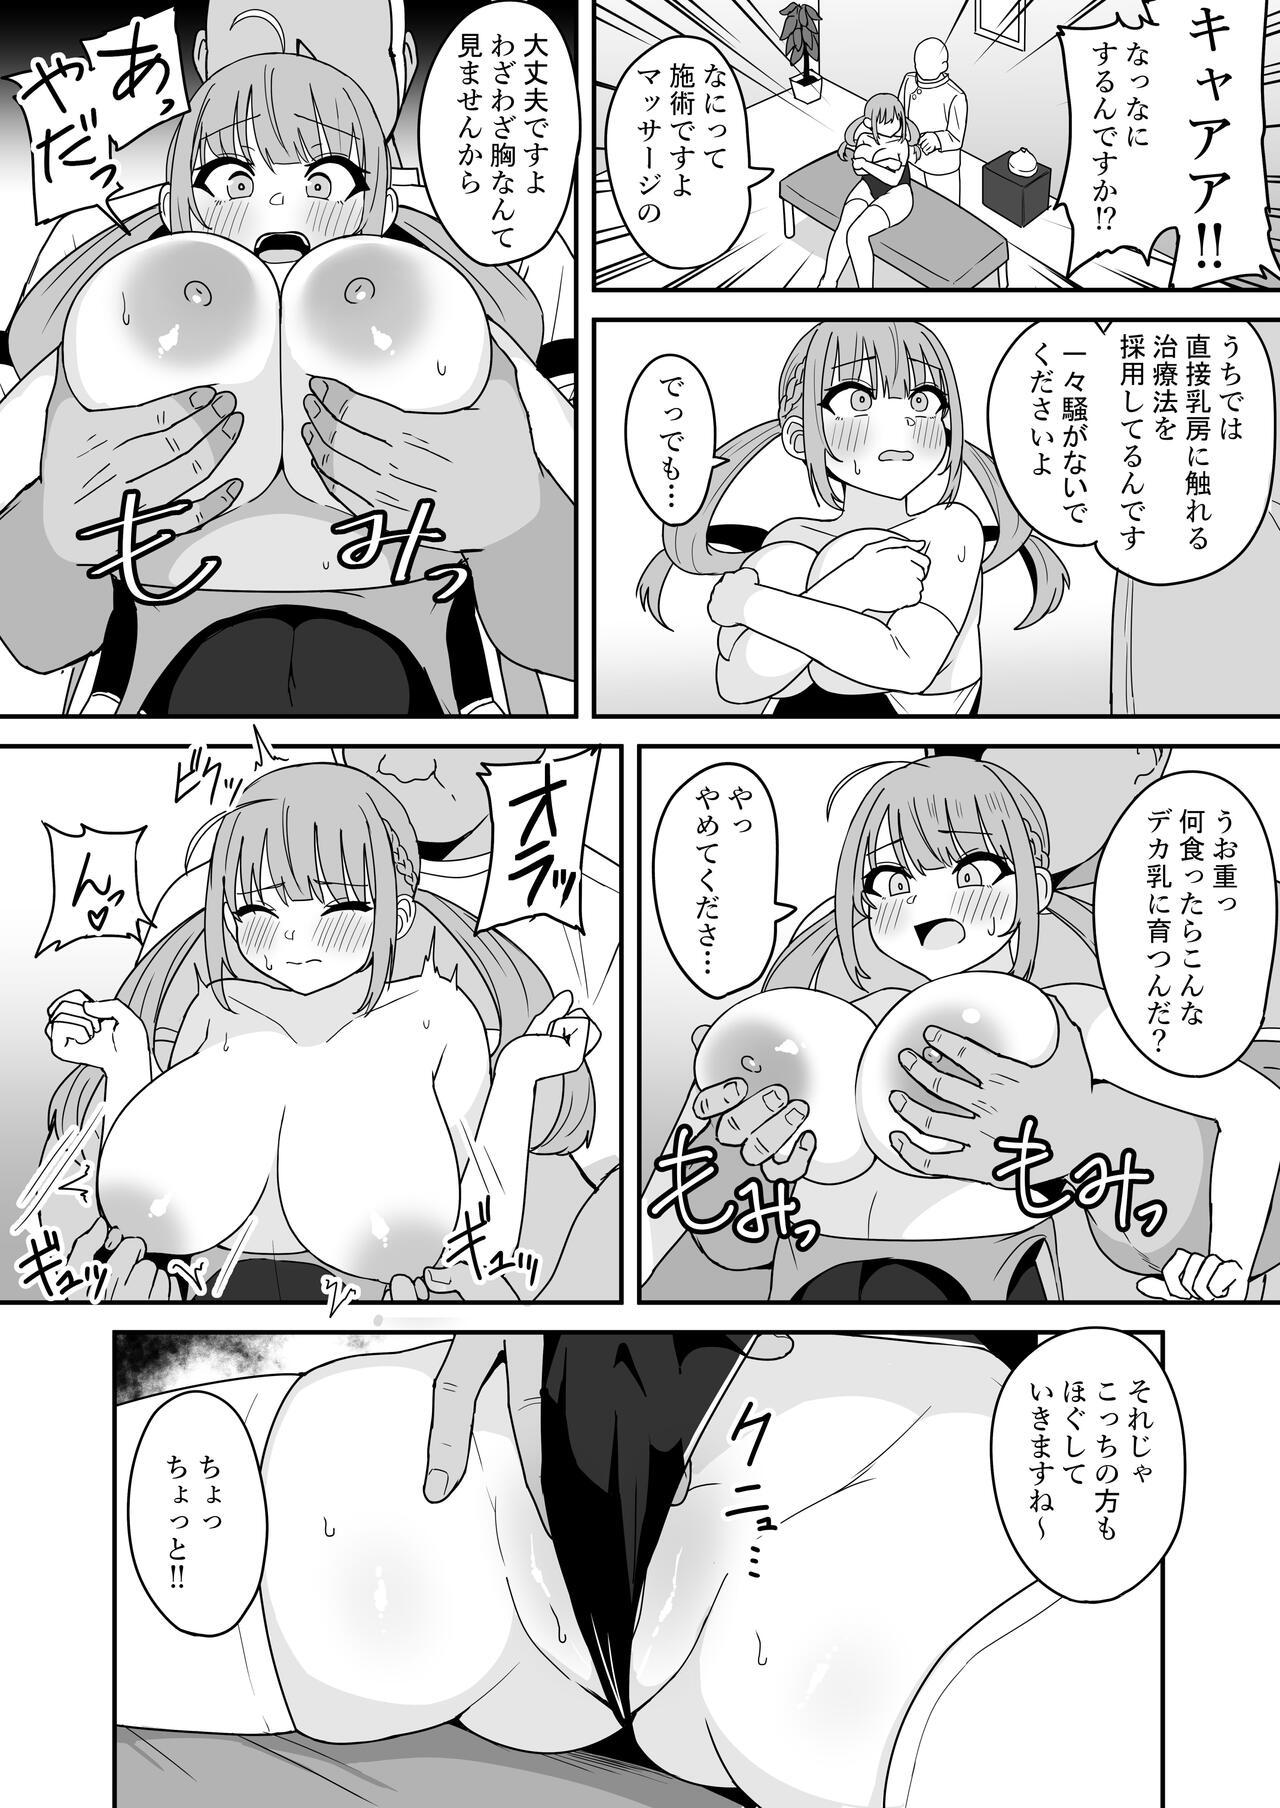 Dildos Aqua Gets Sexually Harassed at a Massage Parlor - Hololive Bdsm - Page 4